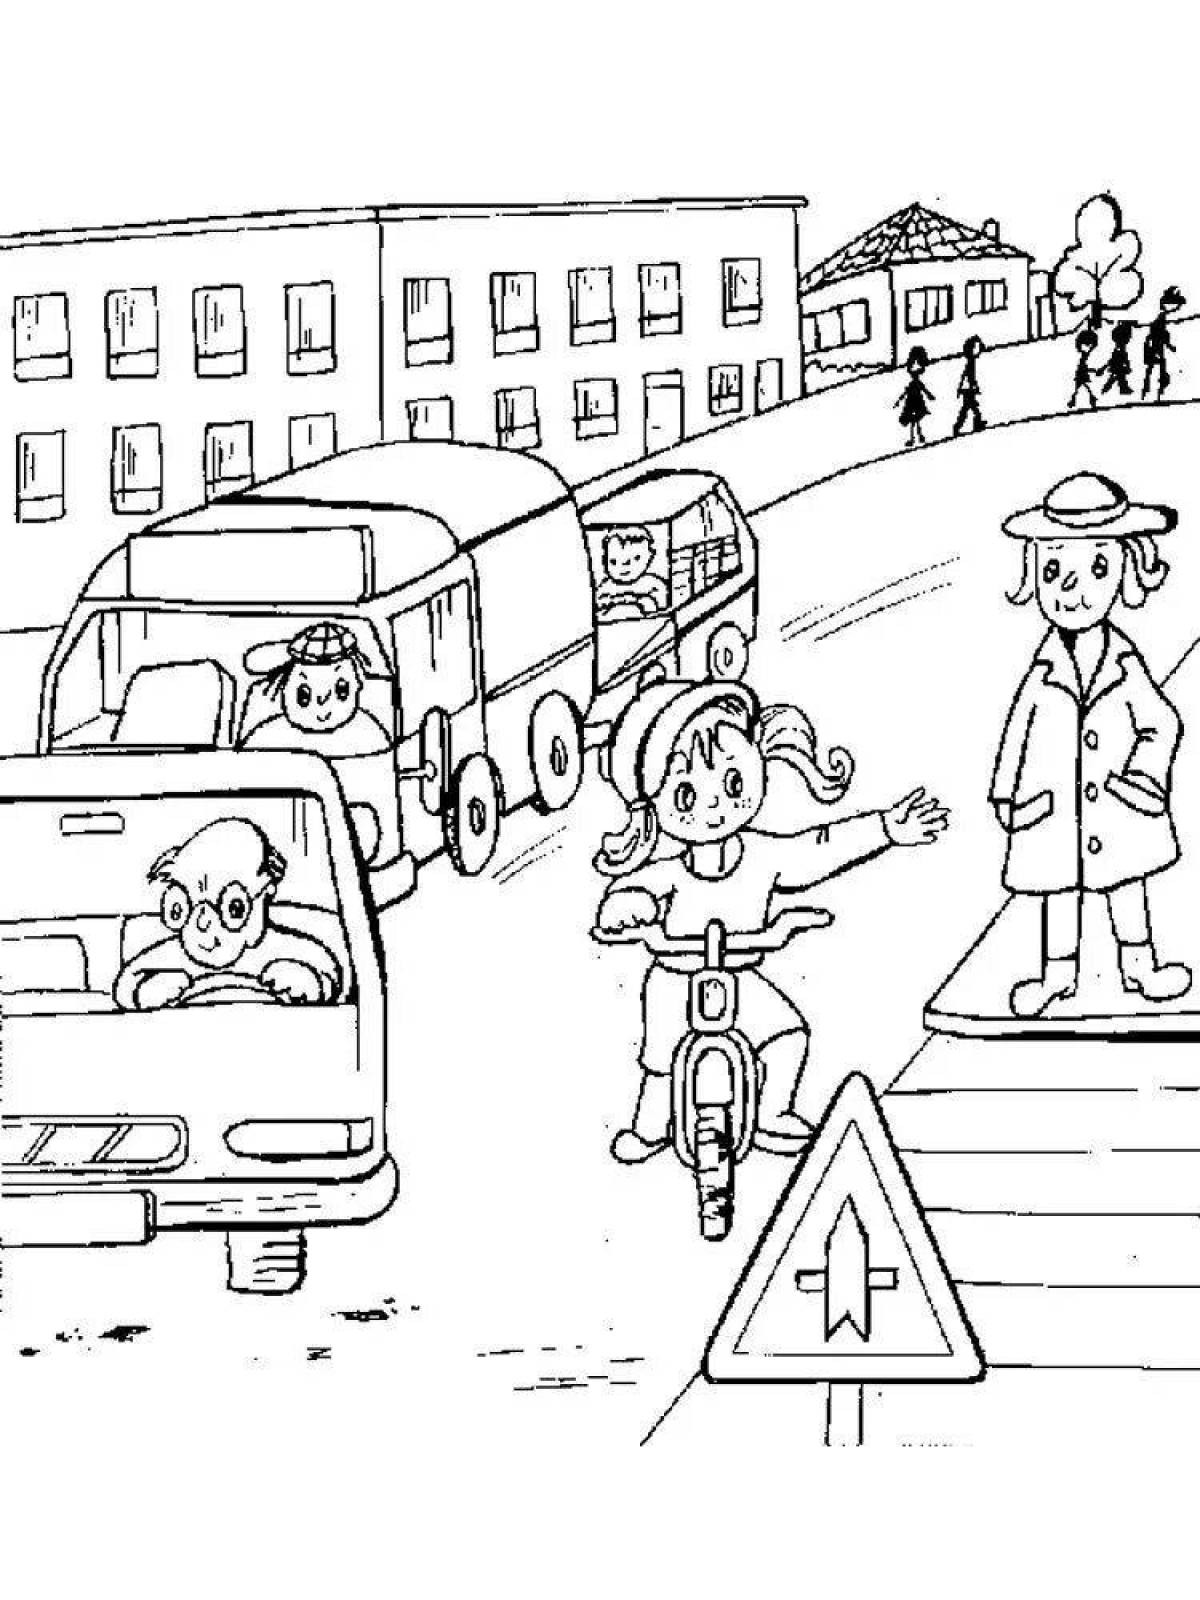 Bright traffic rules coloring book for children 6-7 years old